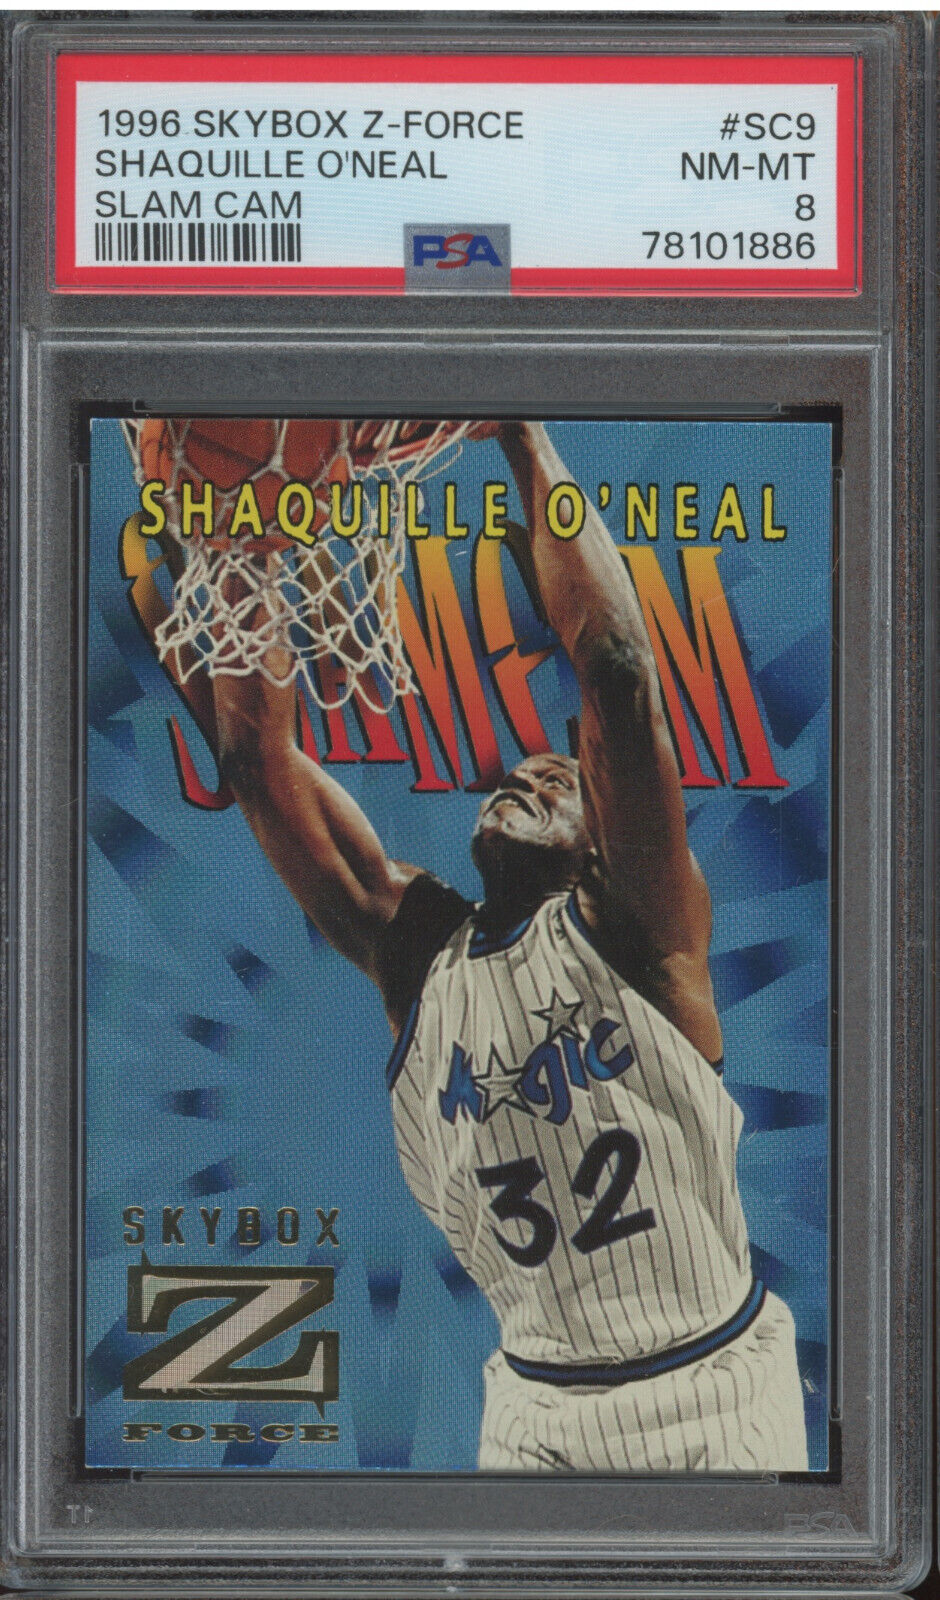 1996 Skybox Z-Force Slam Cam #SC9  Shaquille O'Neal NM-MT PSA 8